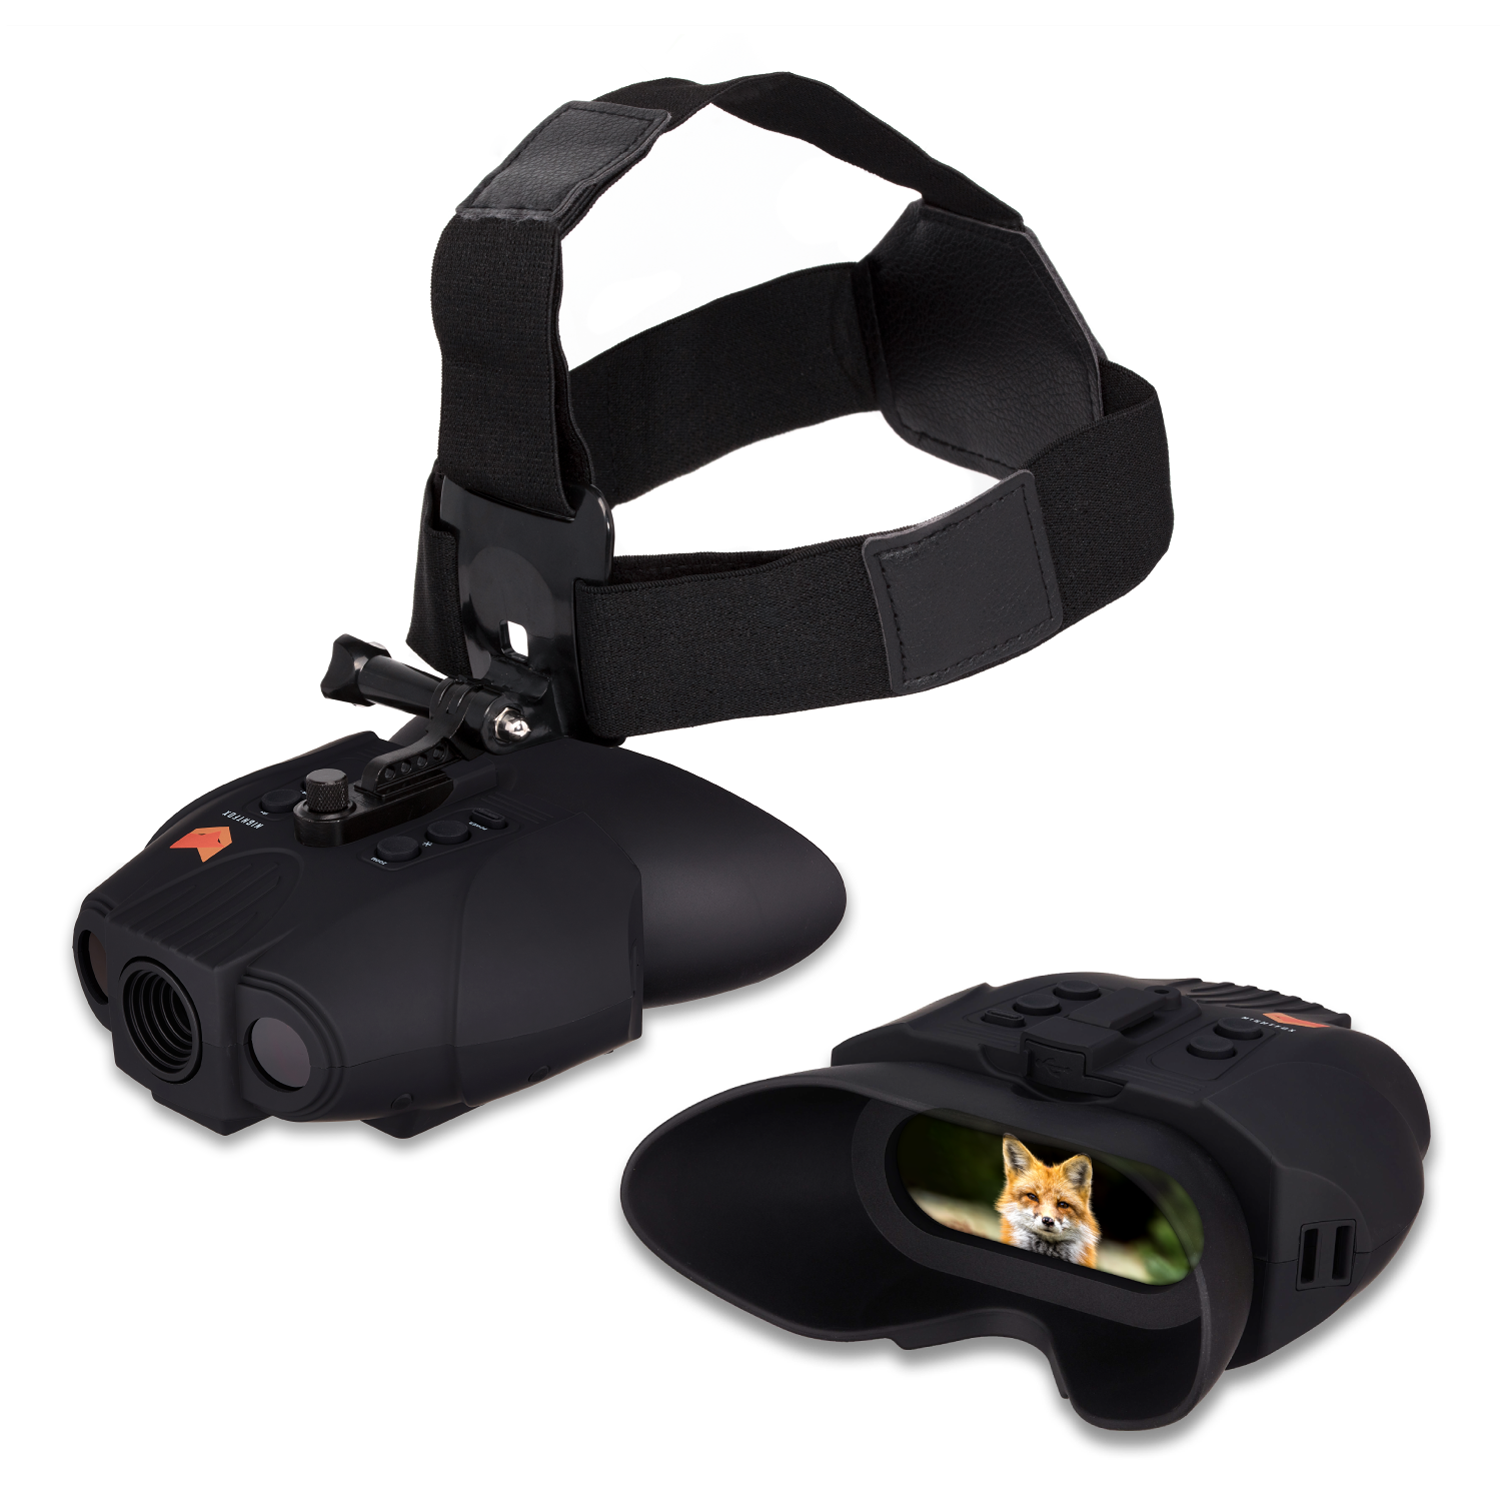 A picture of the Nightfox Swift Night Vision Goggles